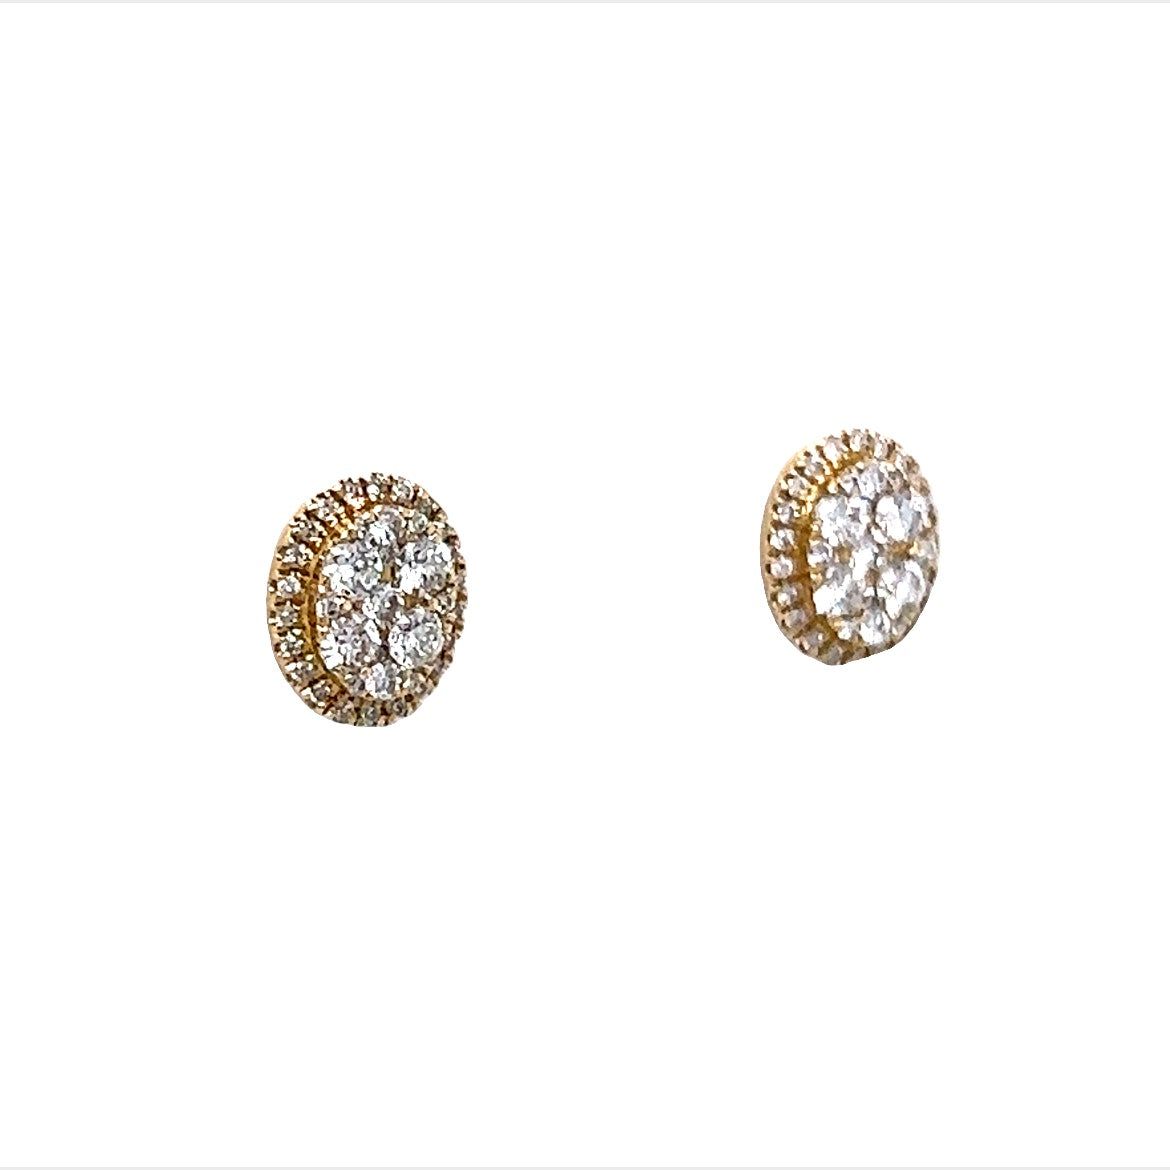 Oval Pave Cluster Diamond Earrings 14K Yellow Gold